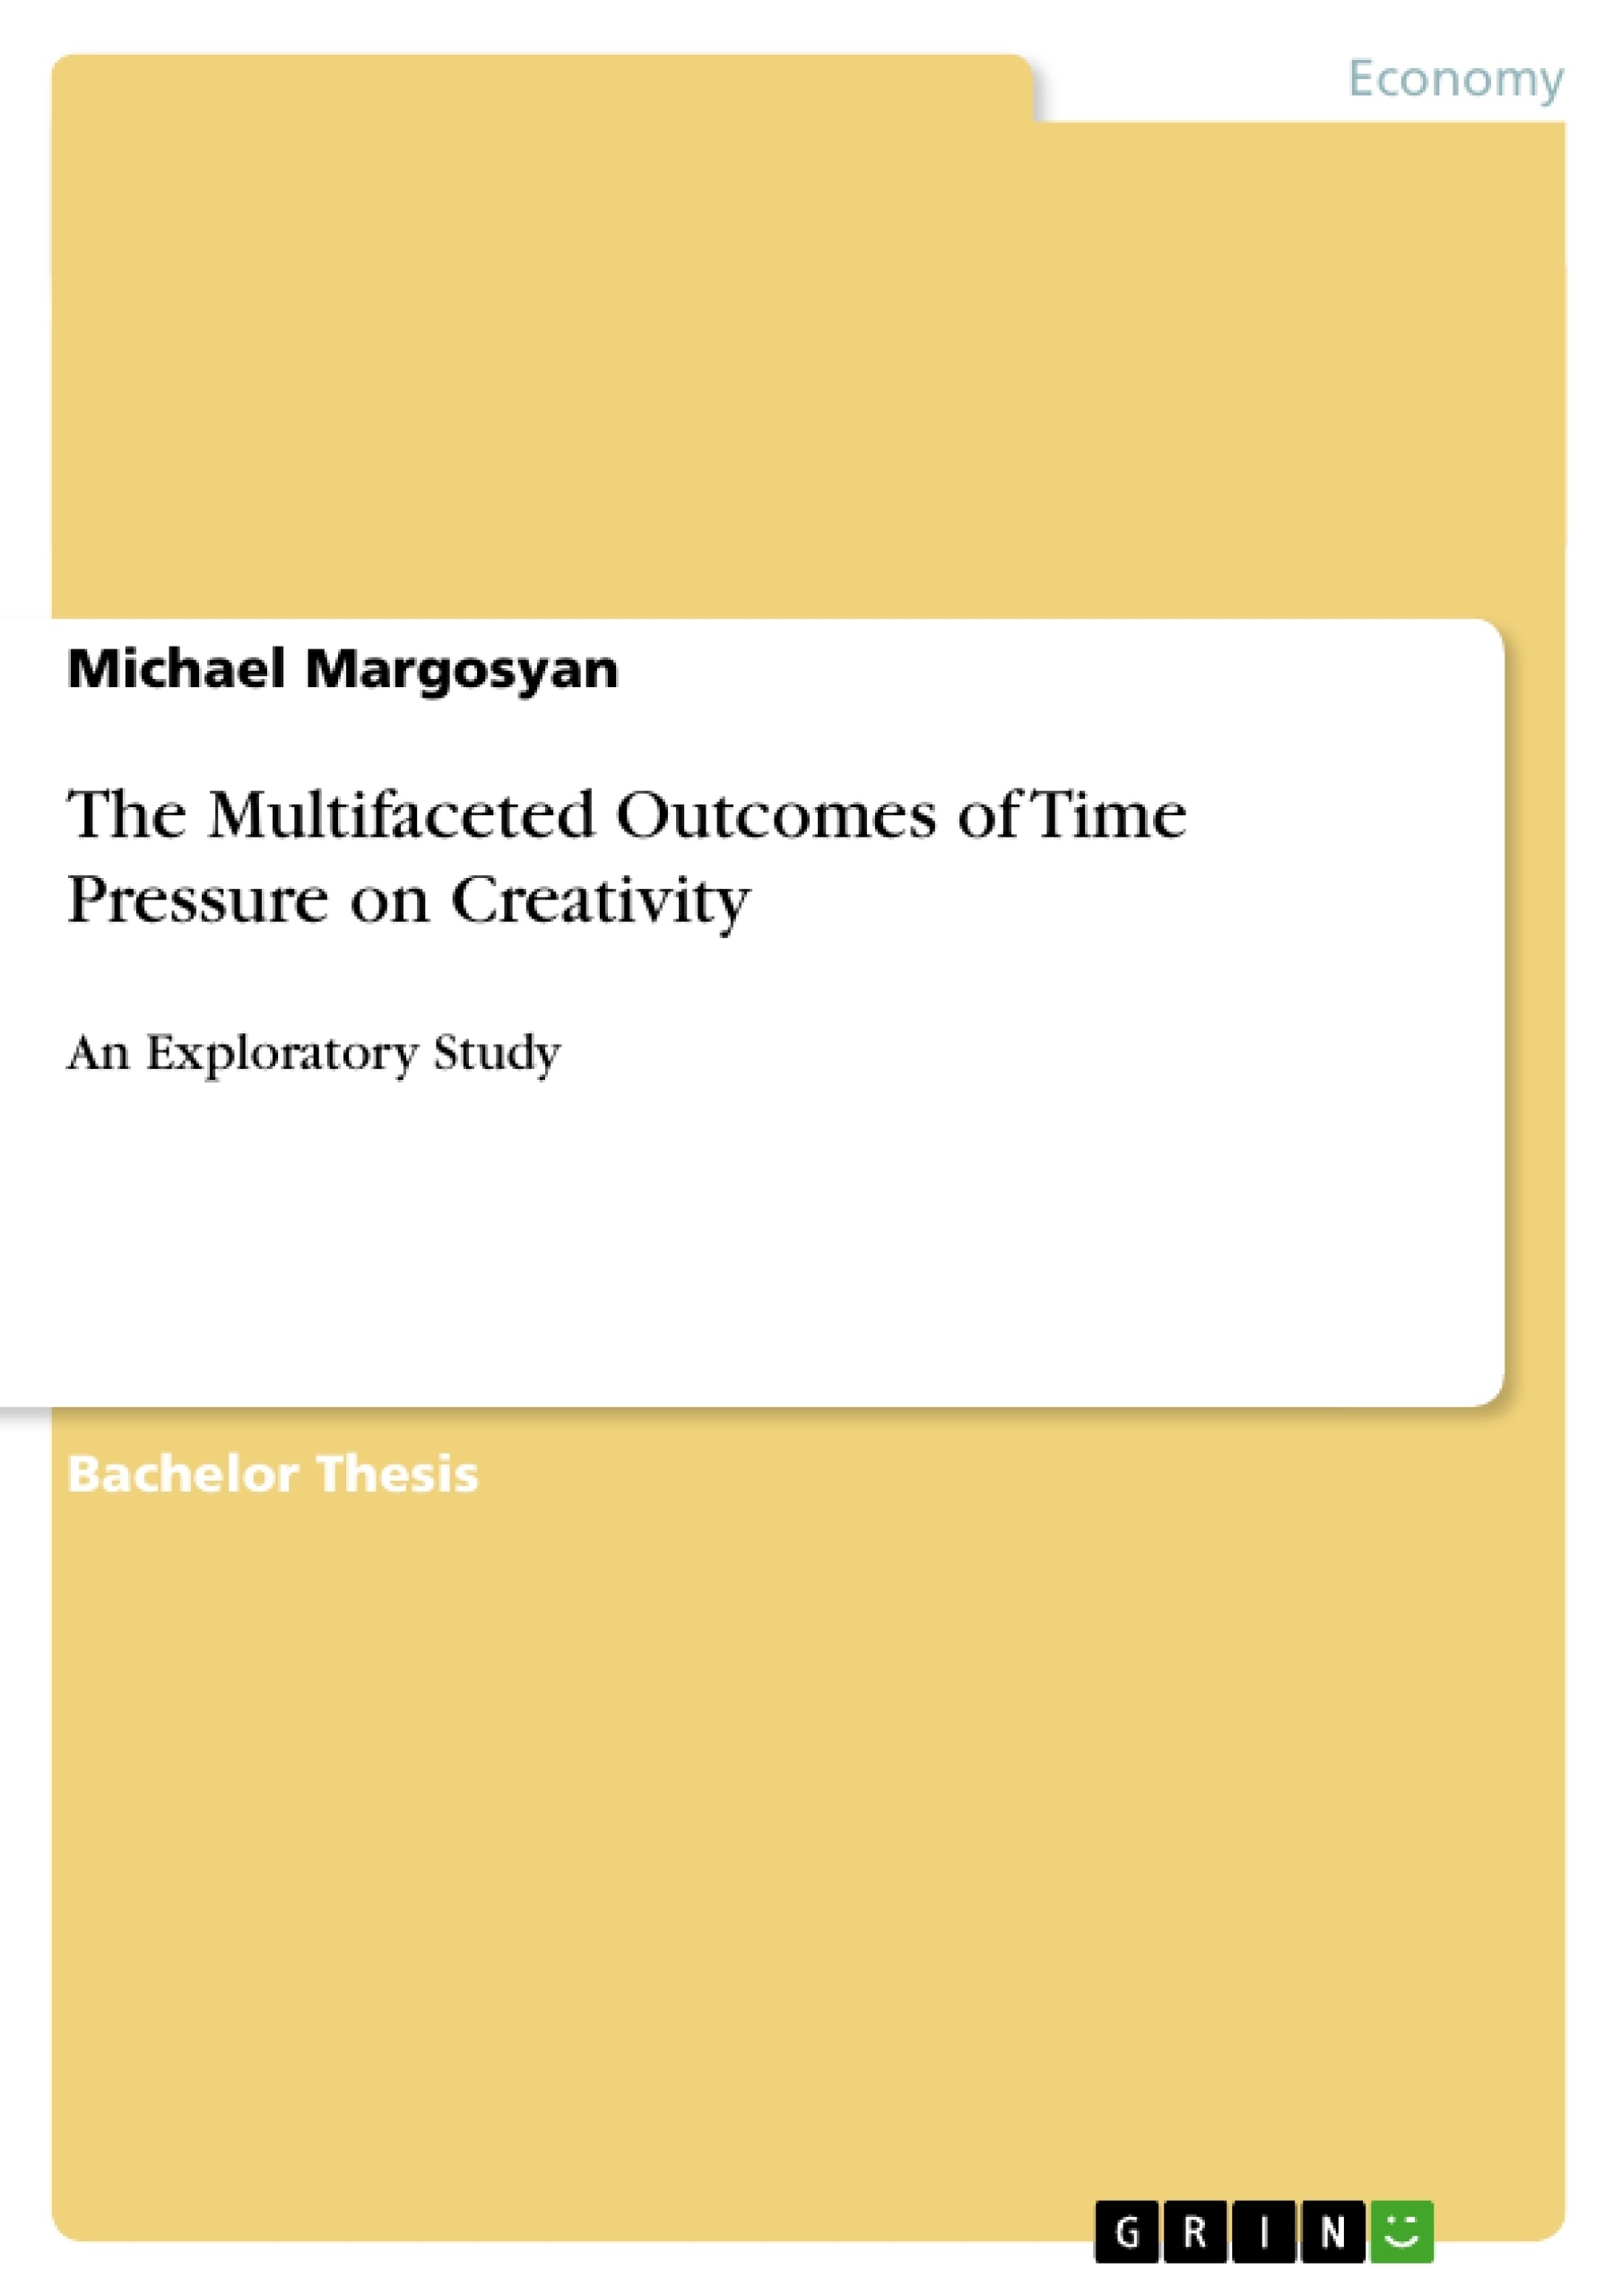 Título: The Multifaceted Outcomes of Time Pressure on Creativity